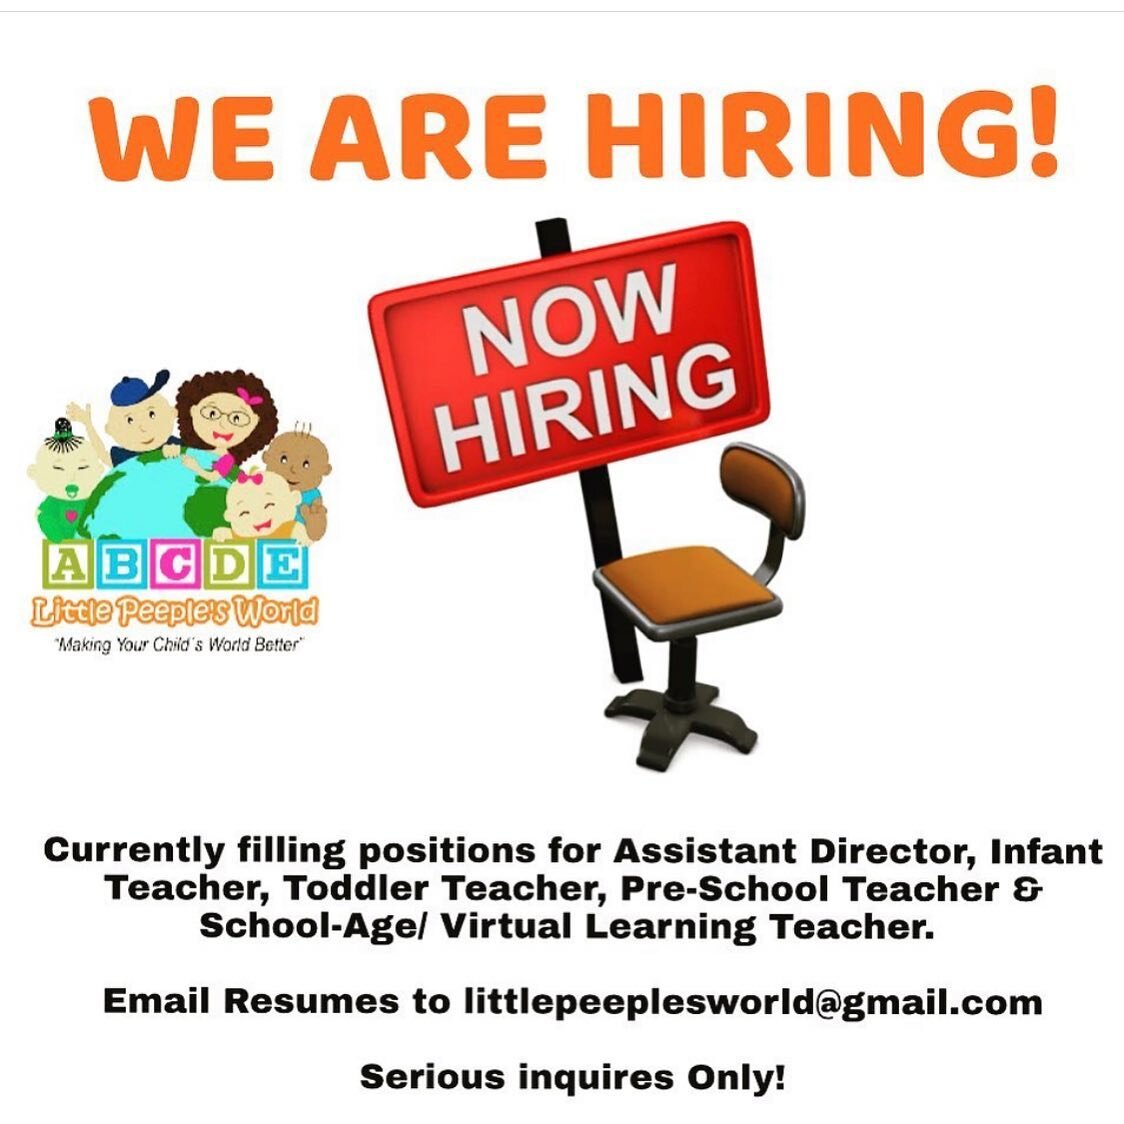 Are you passionate about childcare? Join our TEAM today!! We&rsquo;re looking for qualified individuals like you!!

#nowhiring 
#lpwchildcare 
#employment 
#rvachildcare 
#teacherlife🍎